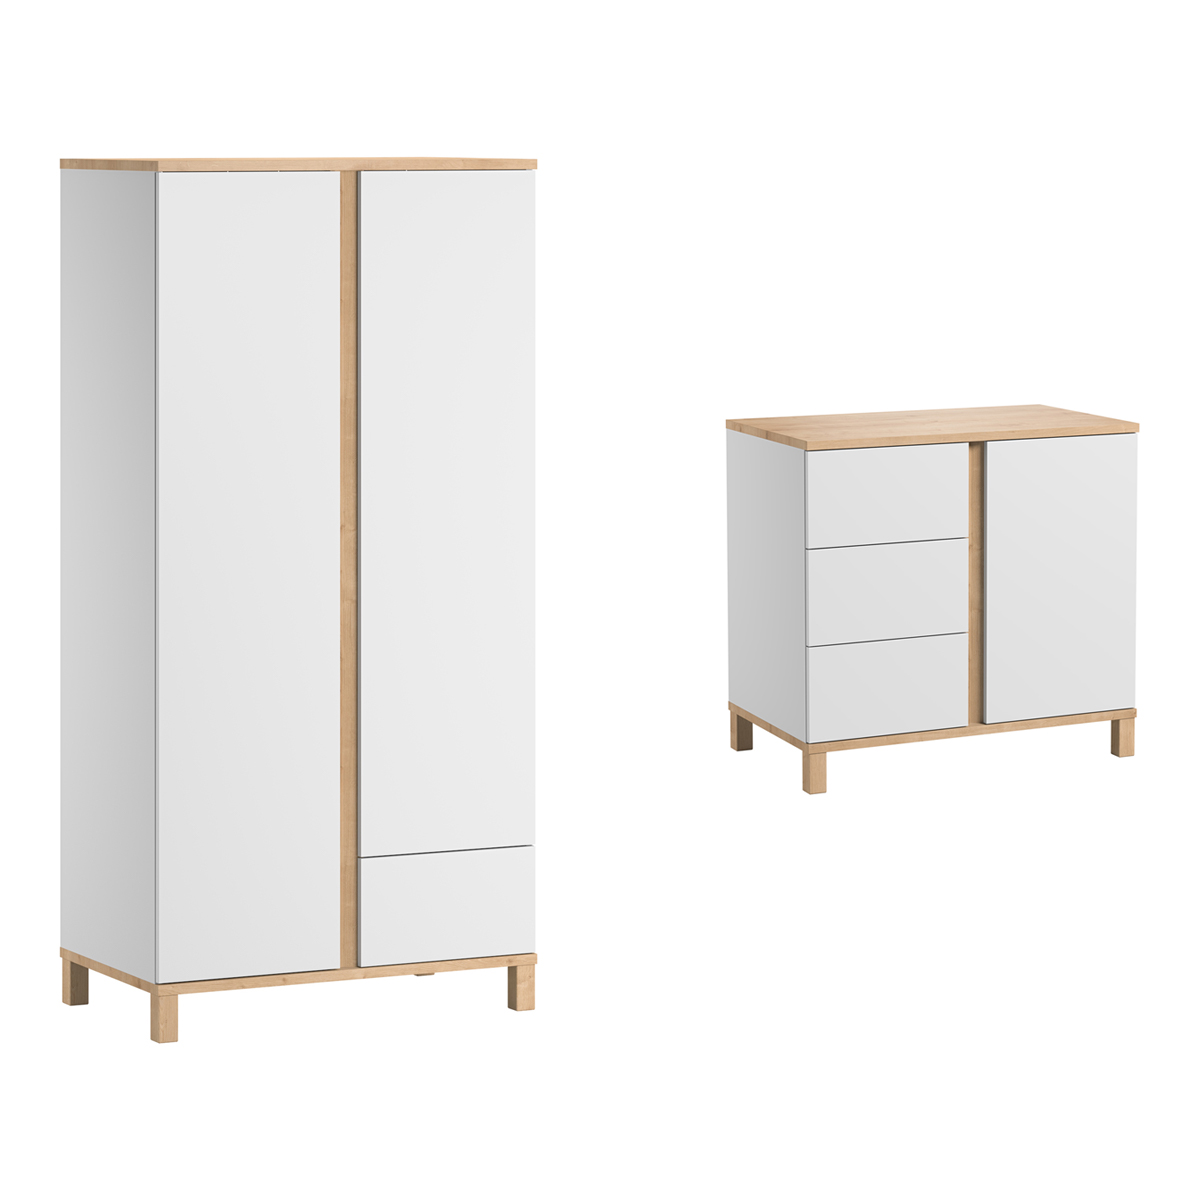 vox_altitude_pack_armoire_commode_blanc